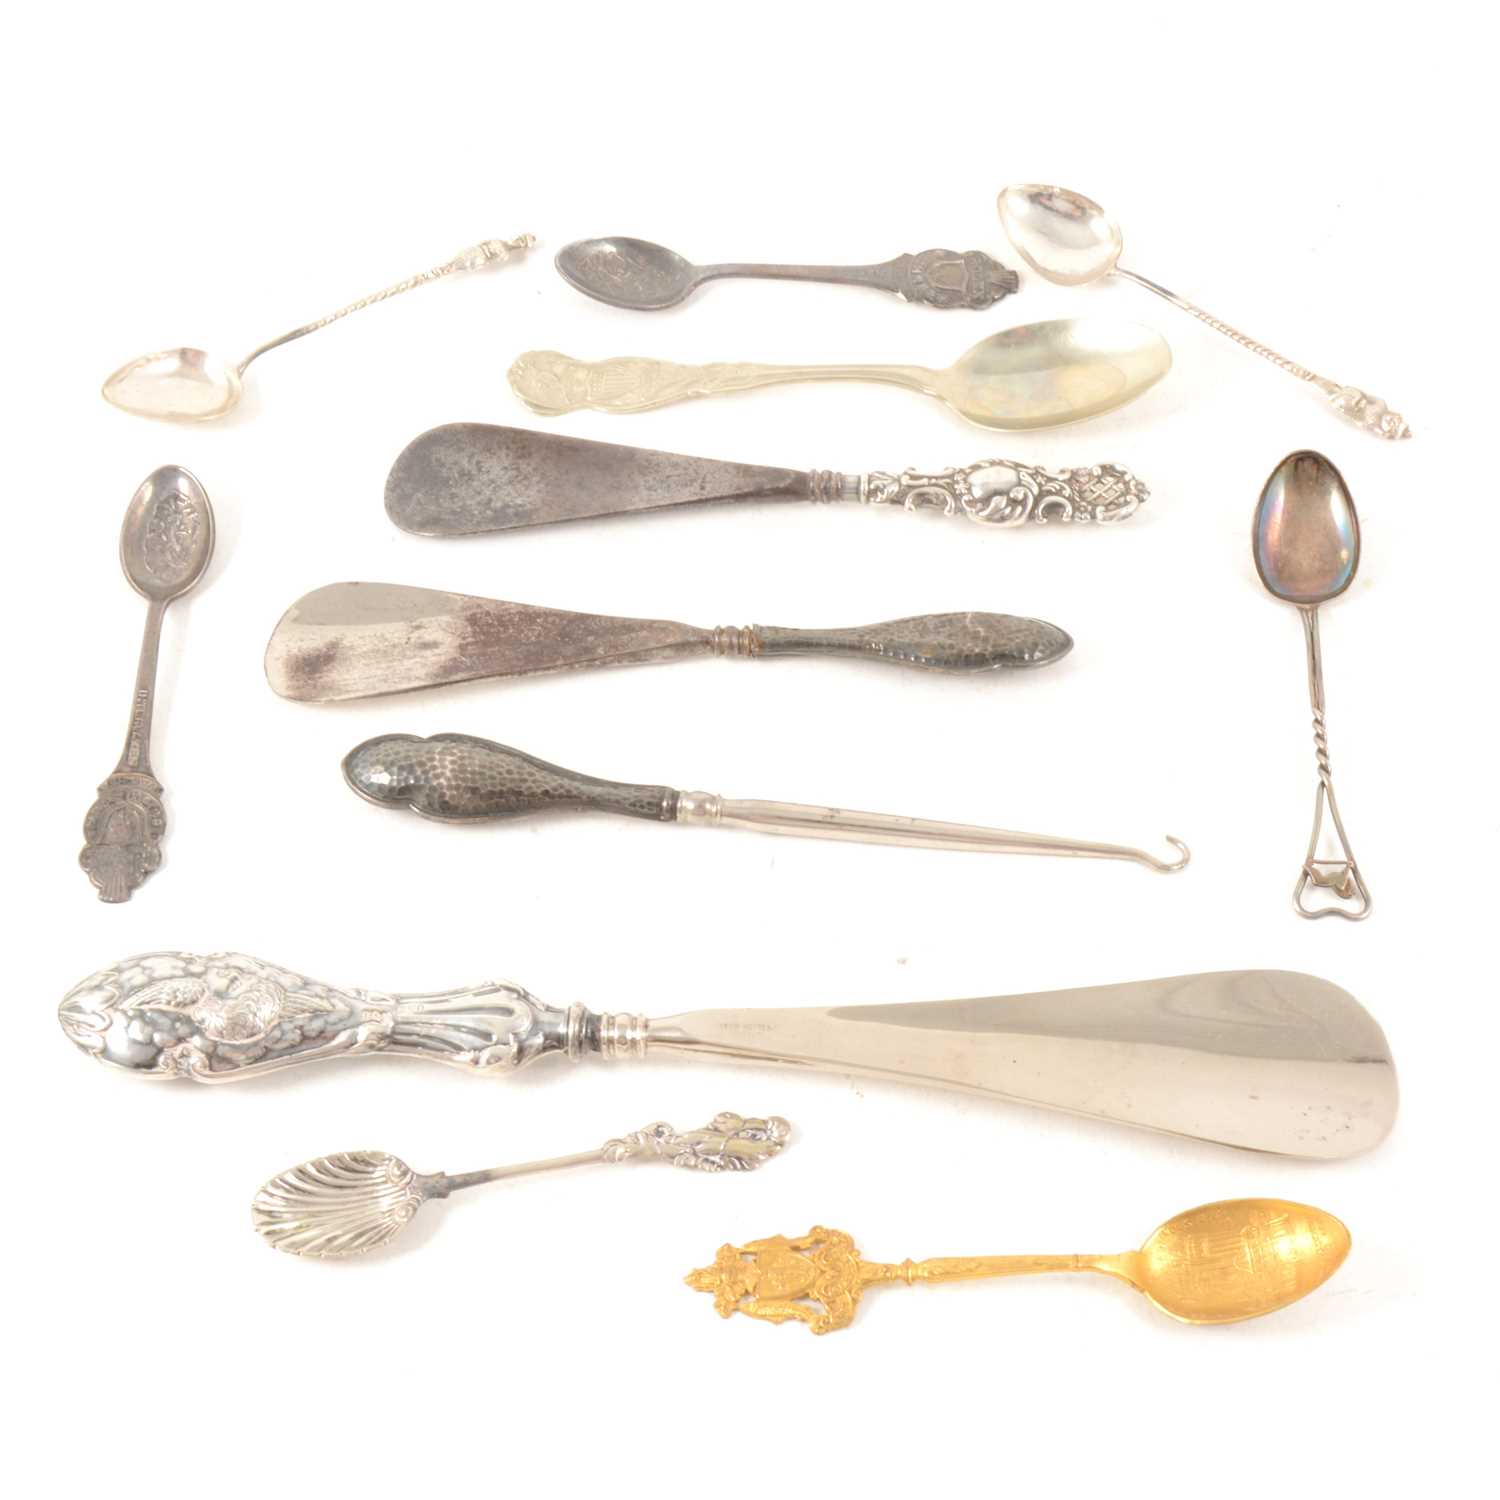 Lot 111 - Three silver handled shoehorn and a buttonhook together with Scottish, American and Eastern teaspoons and two Rolex Watch Interlaken teaspoons.